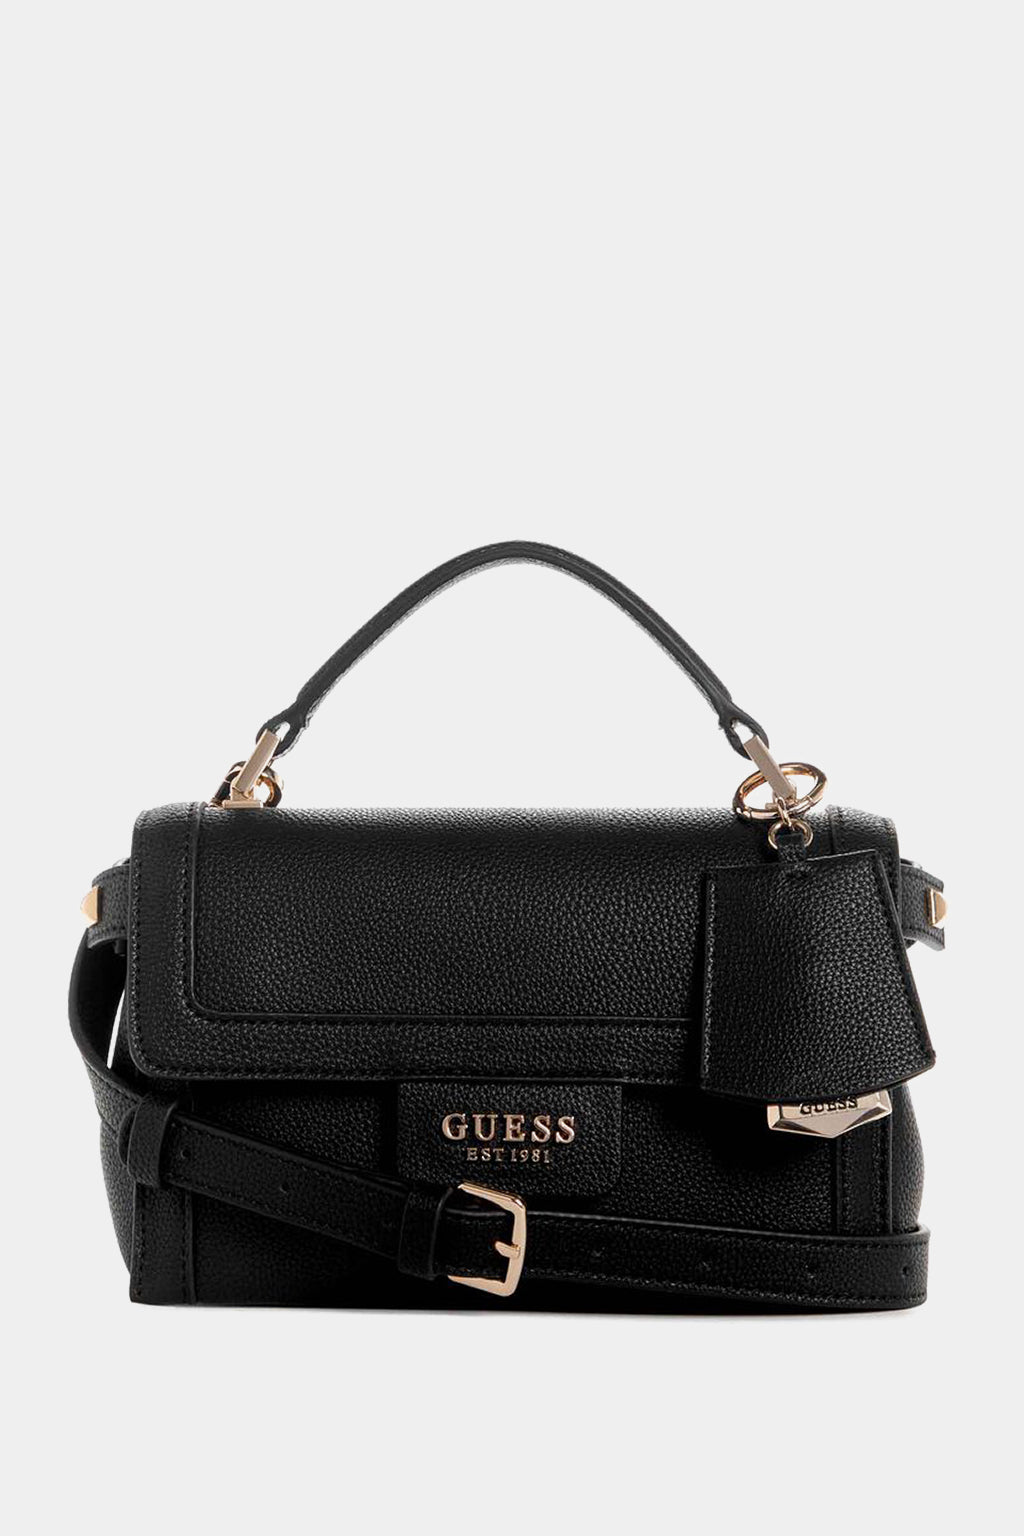 Guess - Angy Top Handle Flap